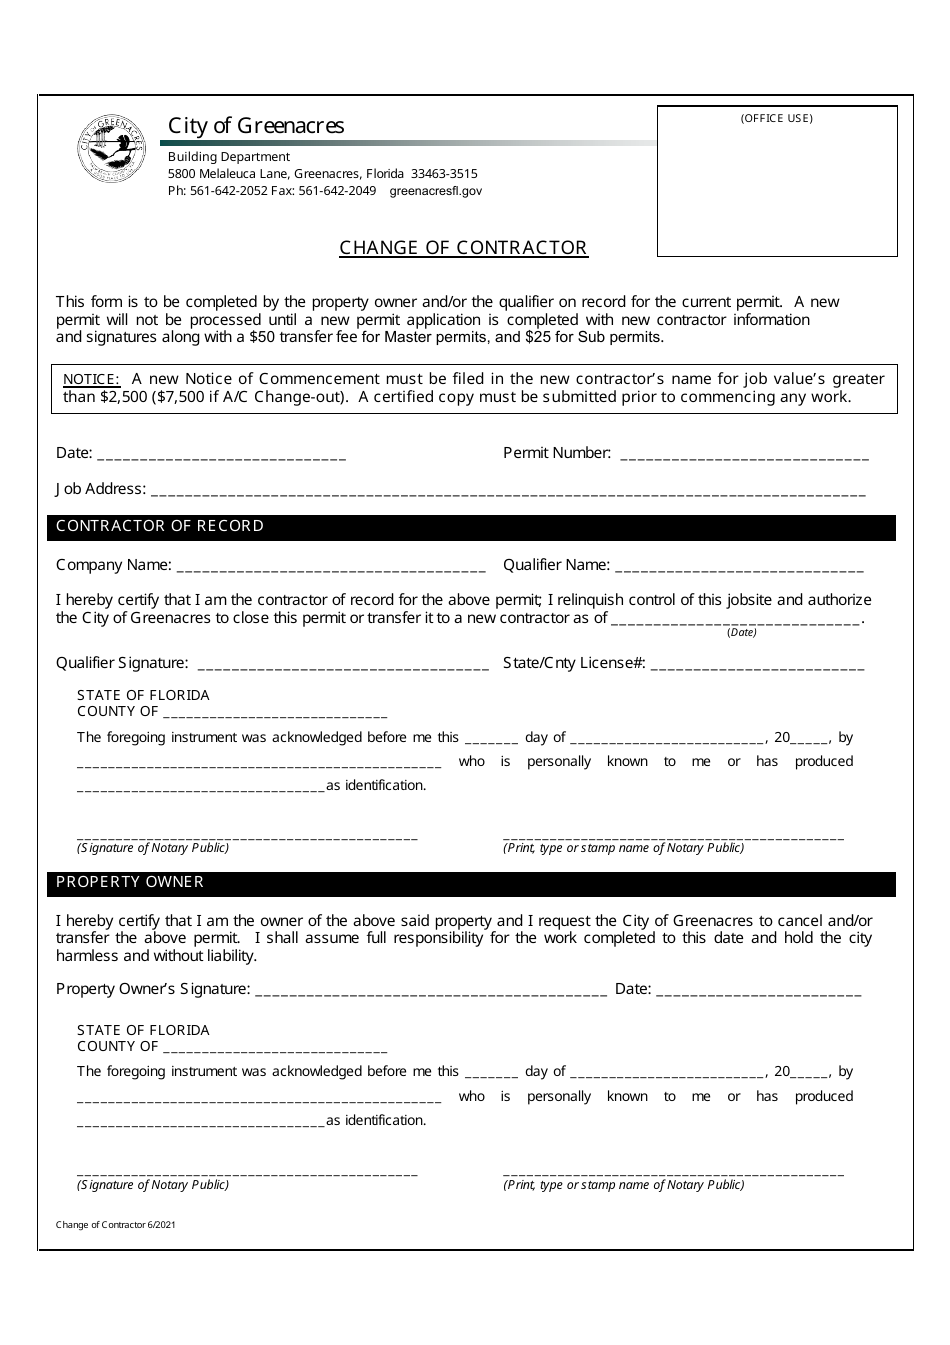 Change of Contractor - City of Greenacres, Florida, Page 1